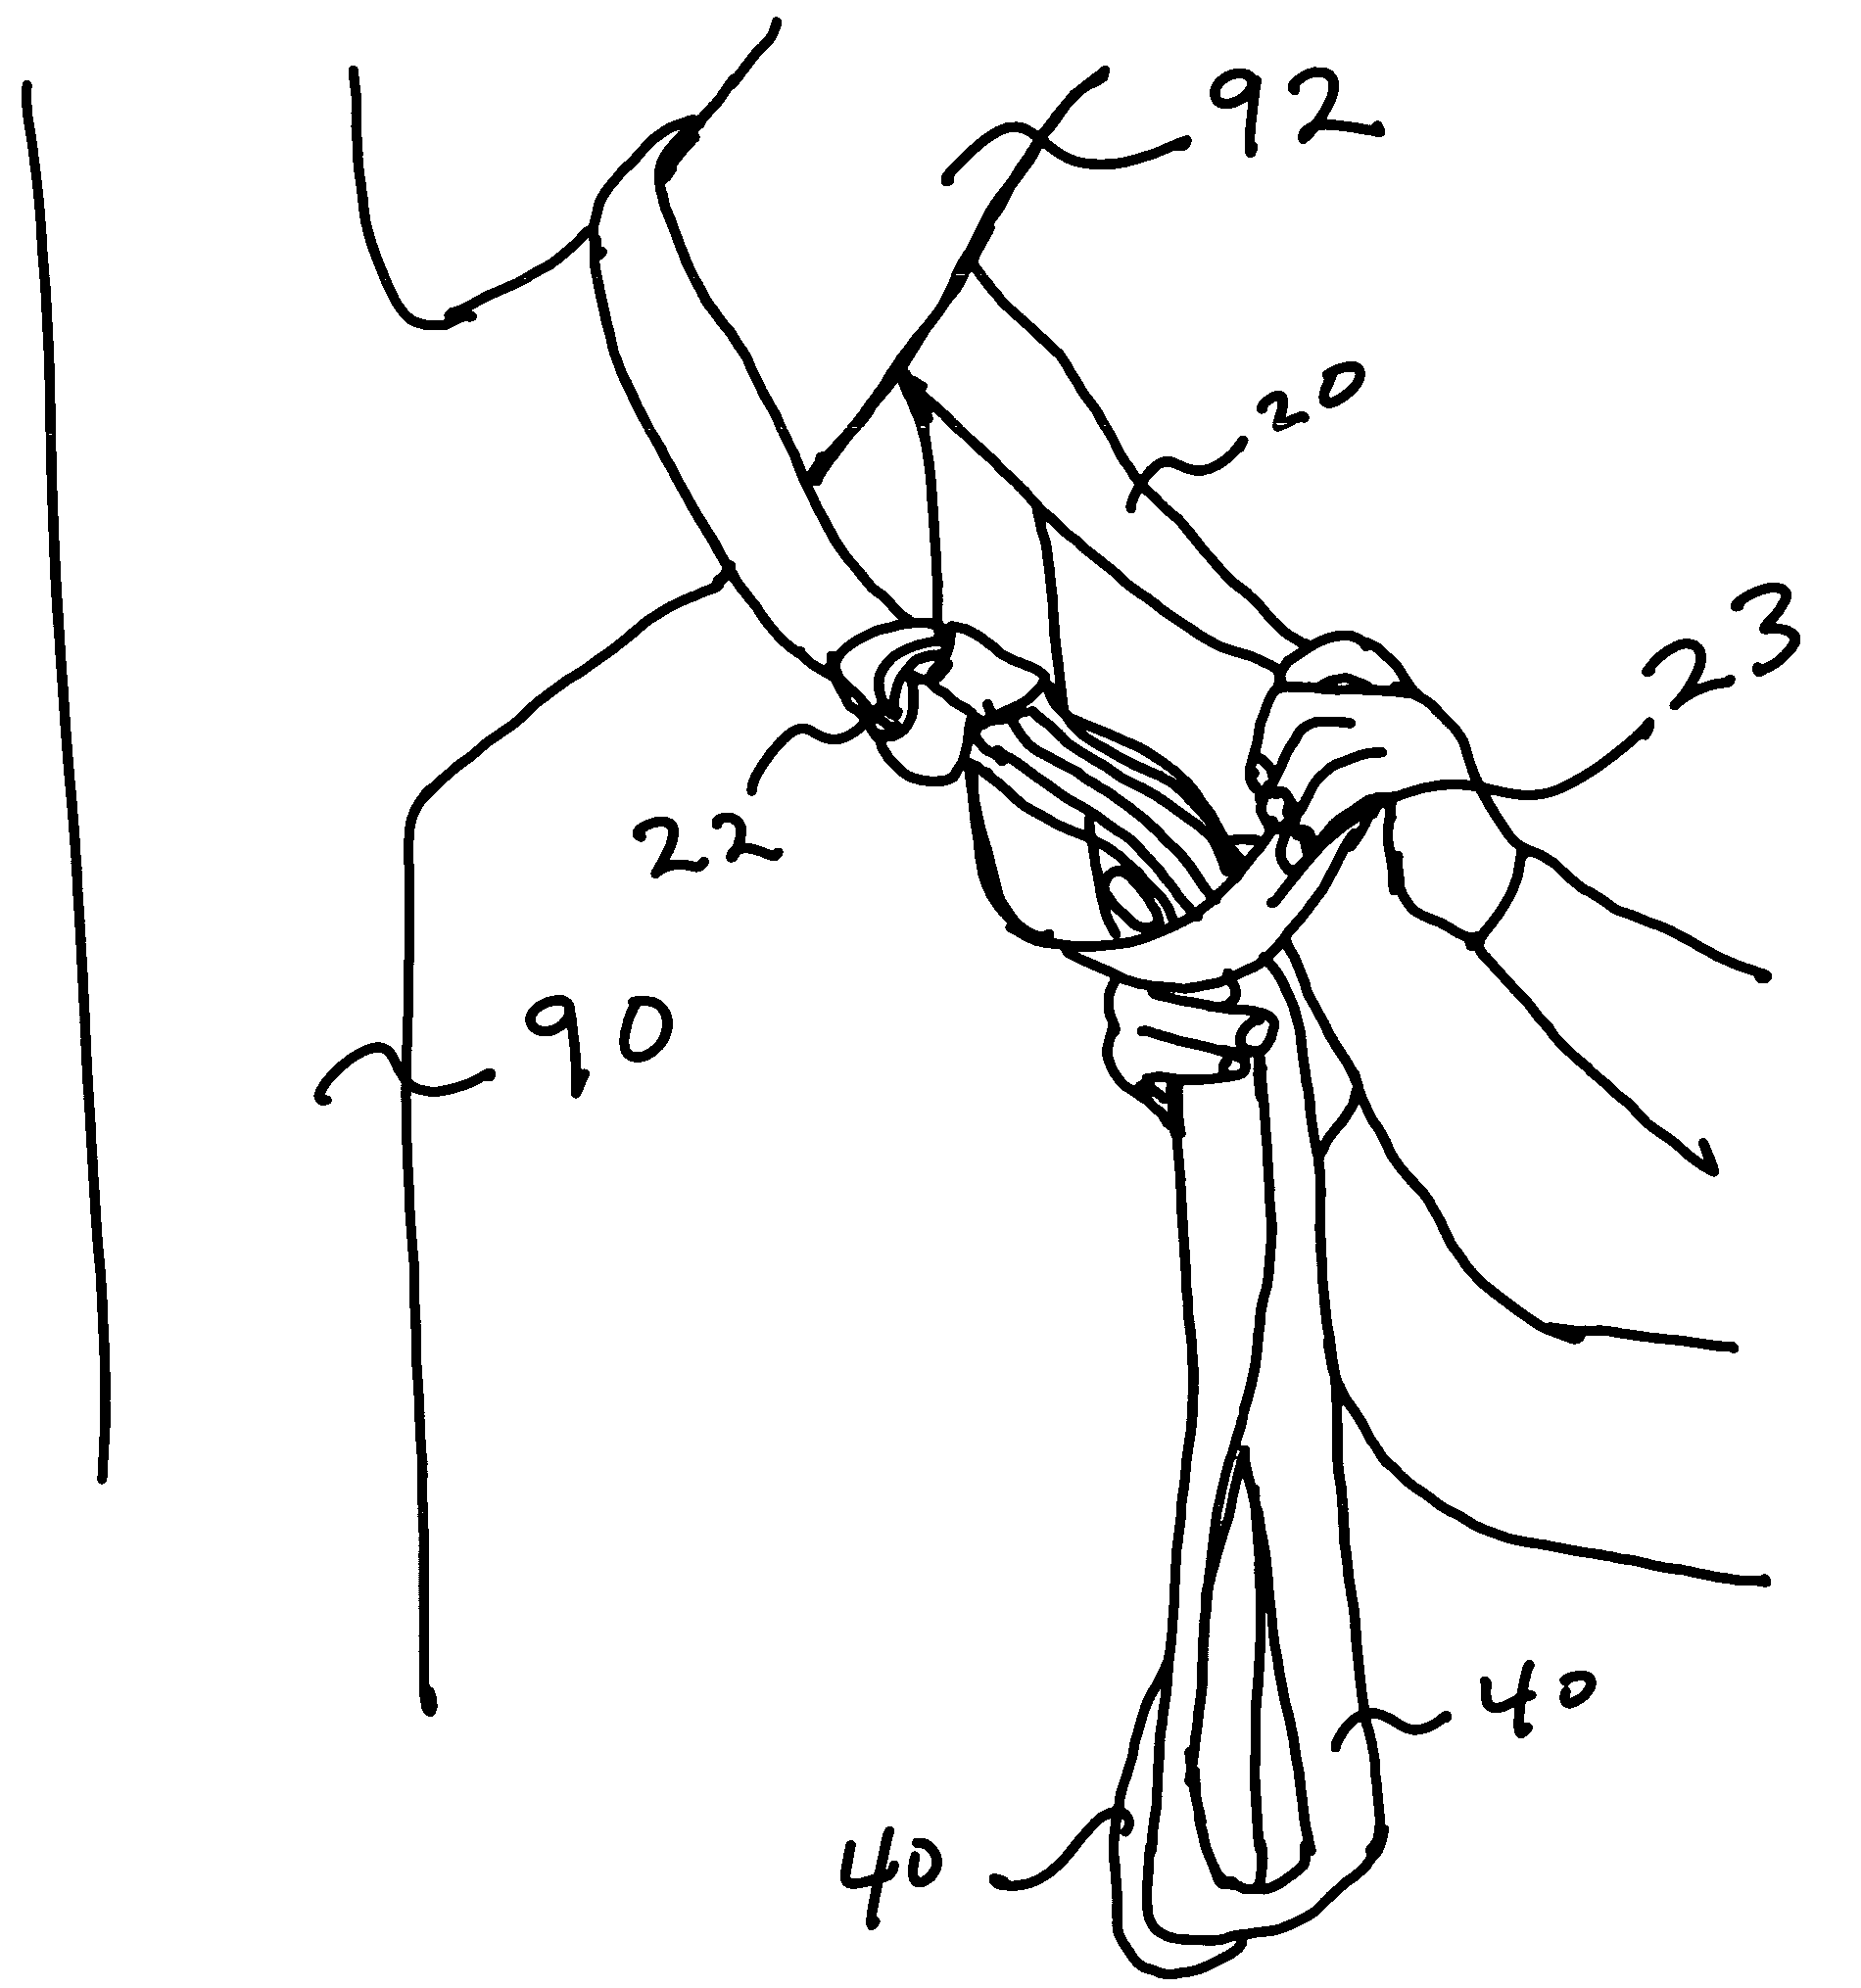 Method and apparatus for practicing yoga in and around trees